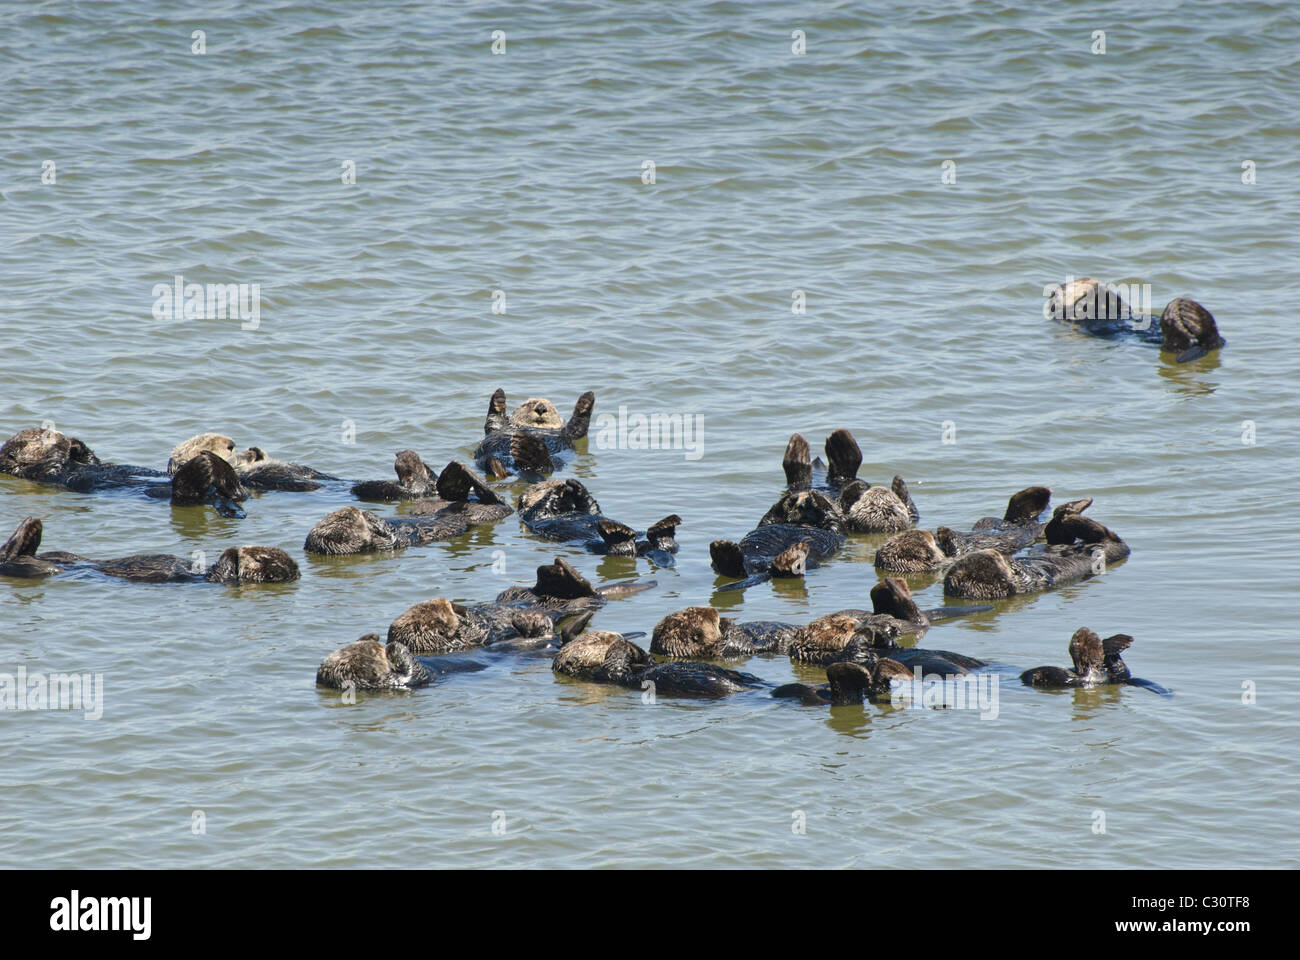 A large group of sea otters (Enhydra lutris) located in the Elkhorn Slough at Moss Landing, California. Stock Photo